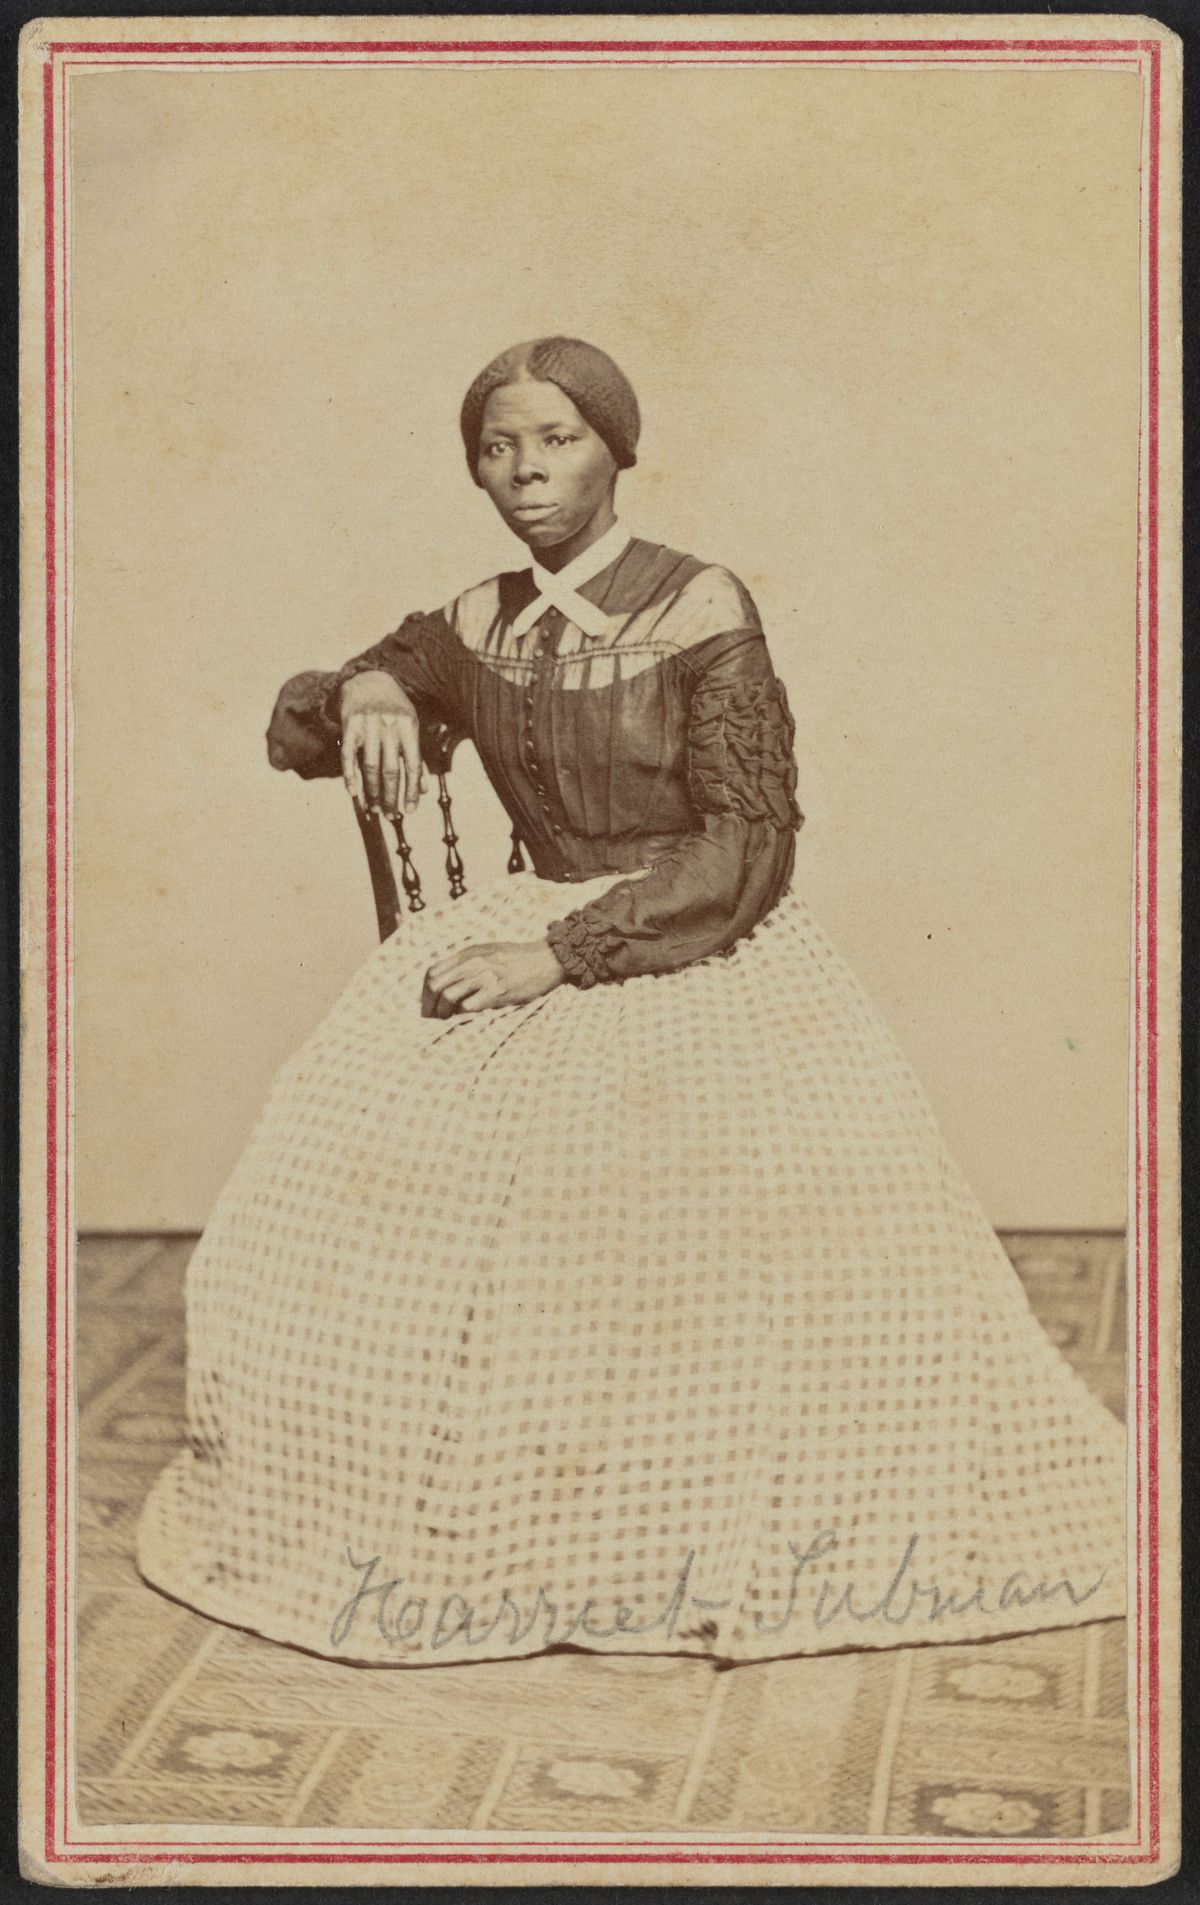 Inside Harriet Tubman’s Life of Service After the Underground Railroad